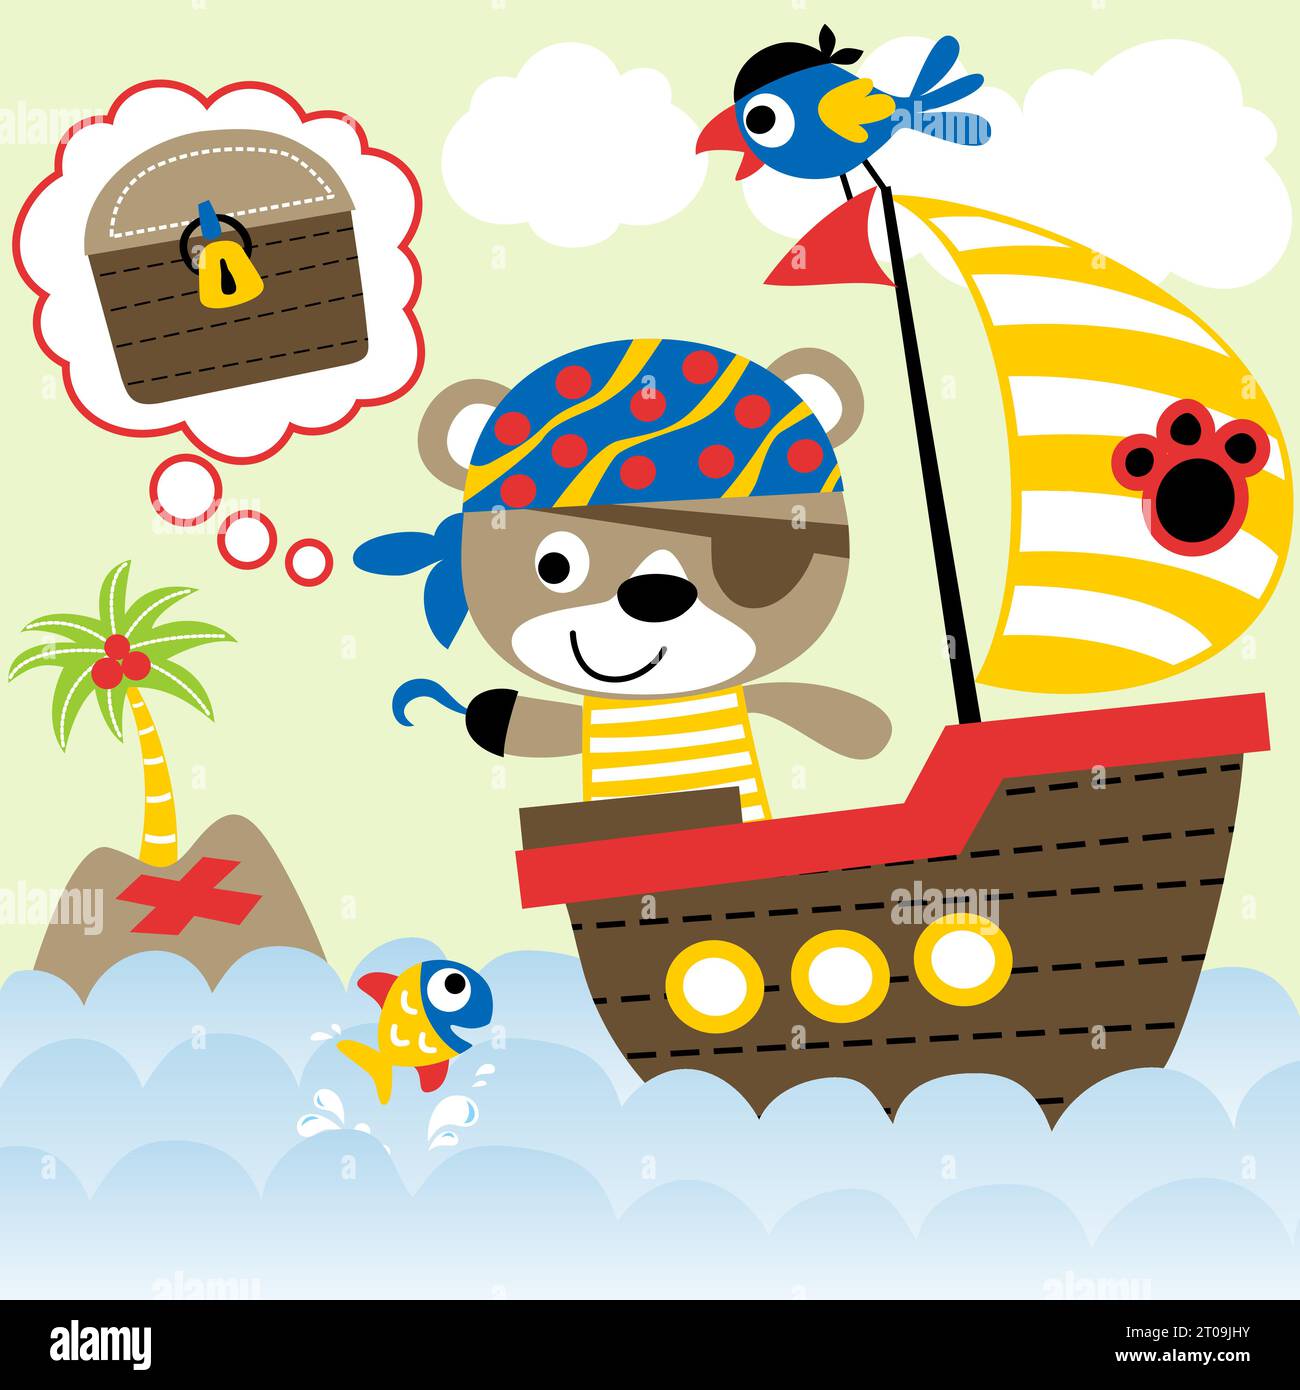 Cute bear with parrot in pirate costume on sailboat, pirate sailing element, vector cartoon illustration Stock Vector